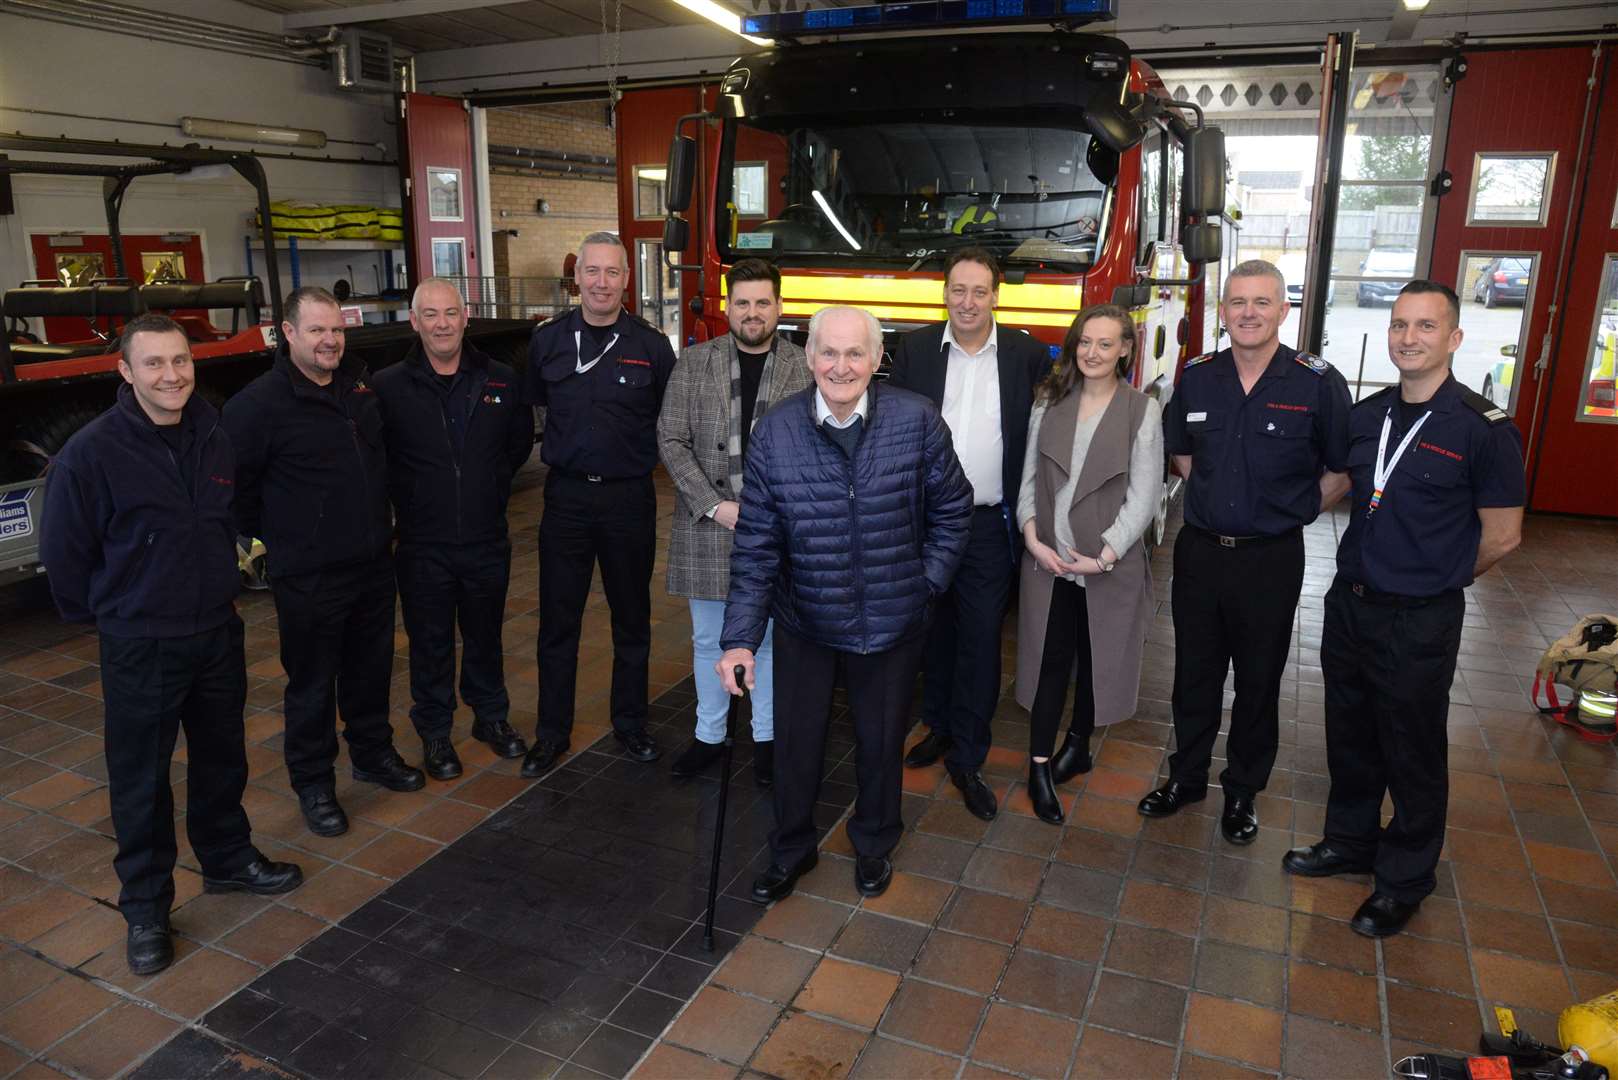 Former firefighter Doug Holgate with current crew members and his family at Strood Fire Station during his visit on Friday. Picture: Chris Davey